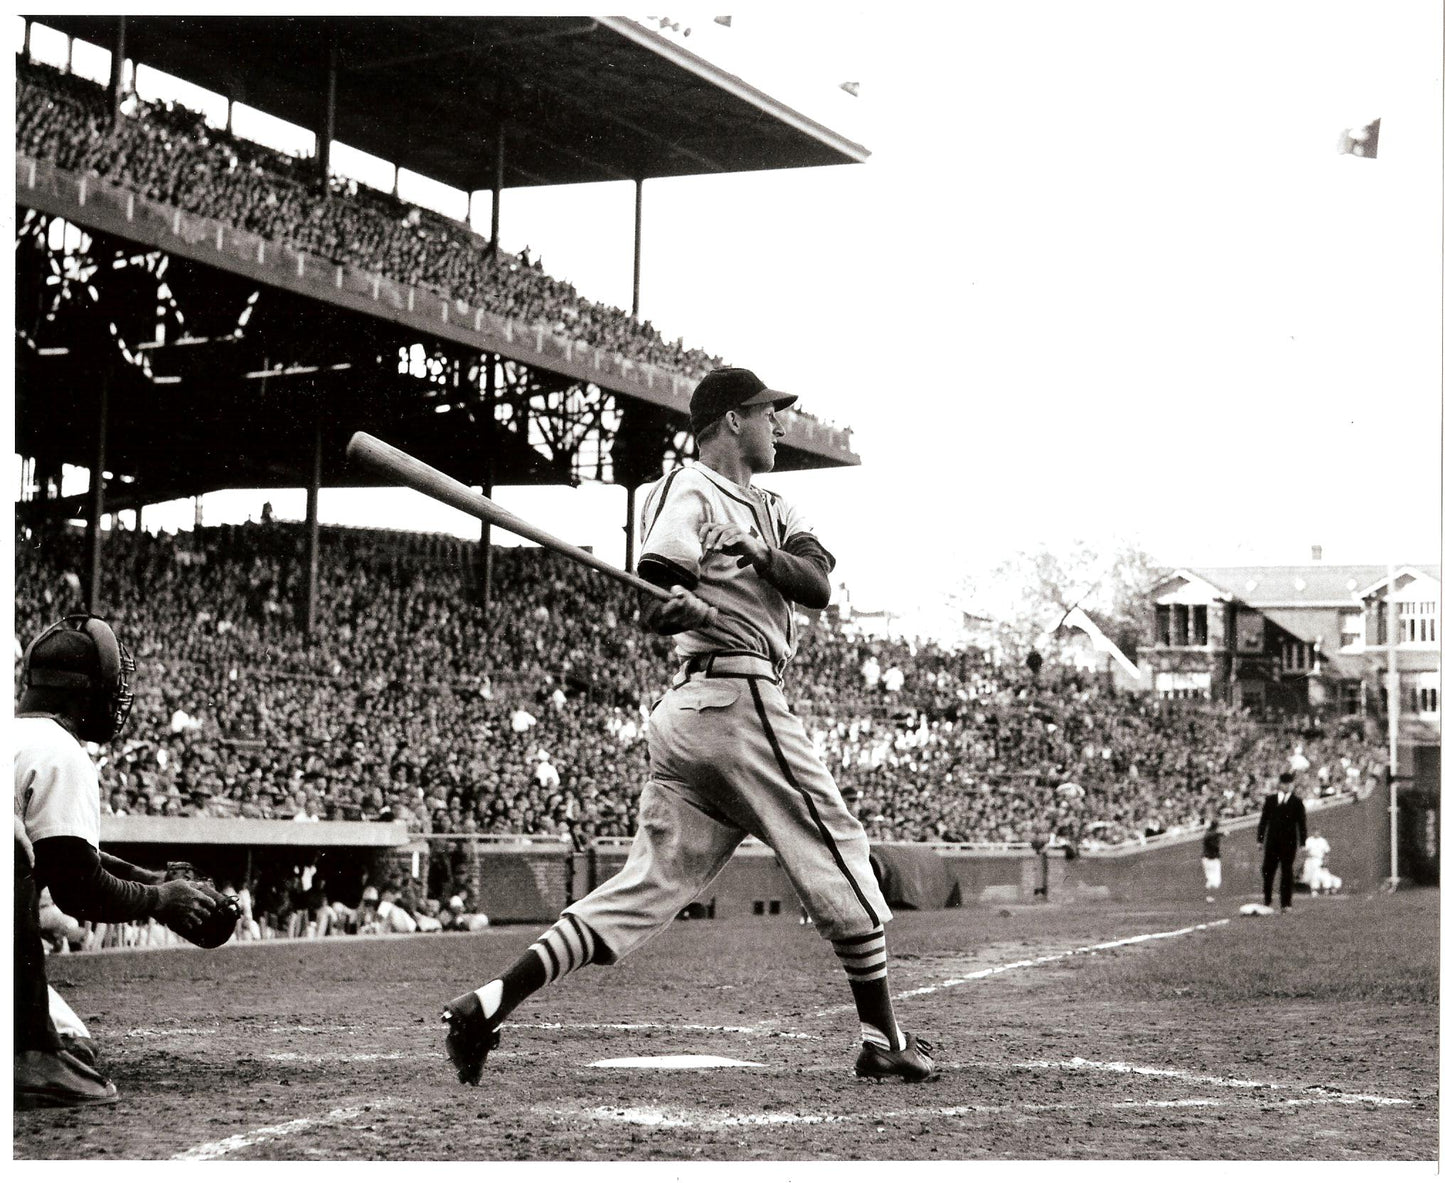 St. Louis Cardinals Stan Musial in 1948 8x10 Photograph